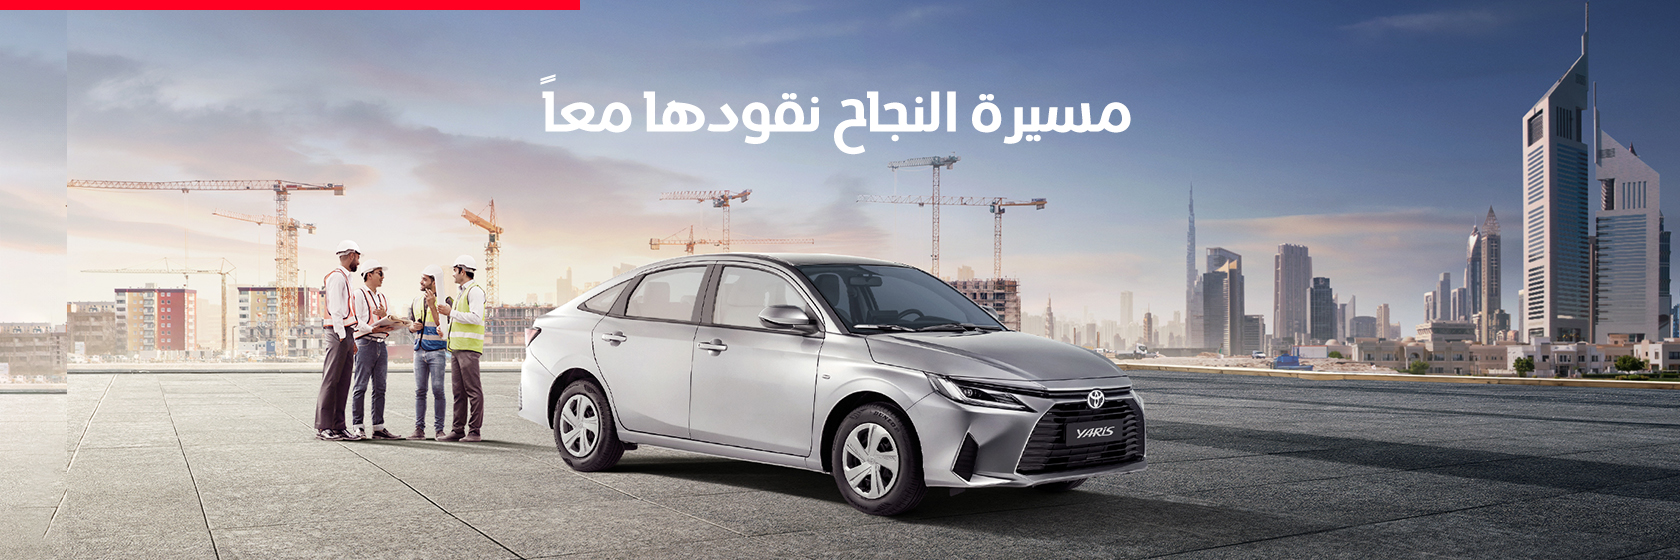 business-solutions-yaris